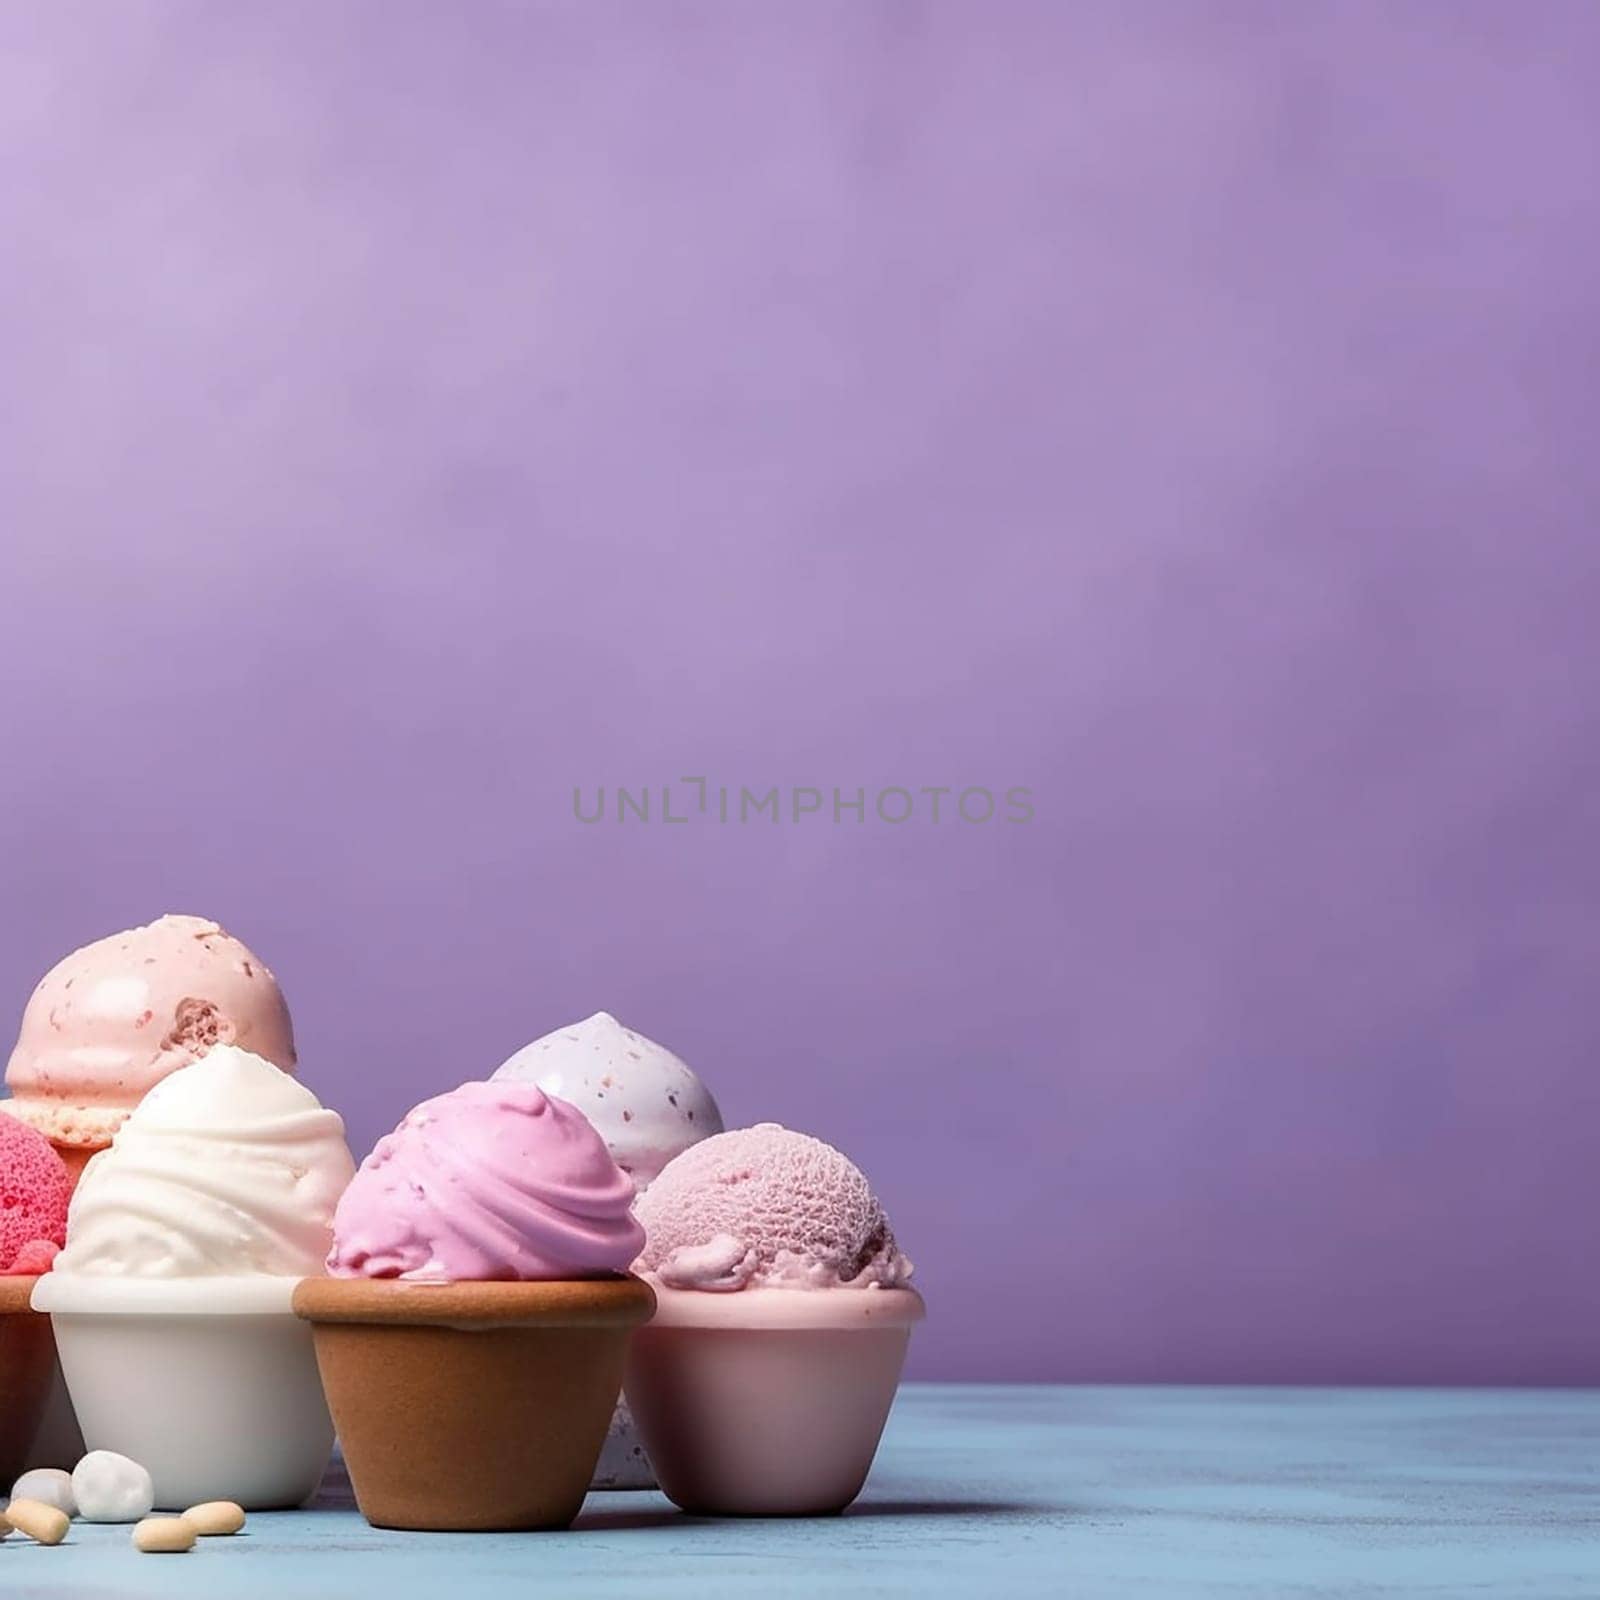 Assorted ice cream scoops in cups against a purple backdrop. by Hype2art